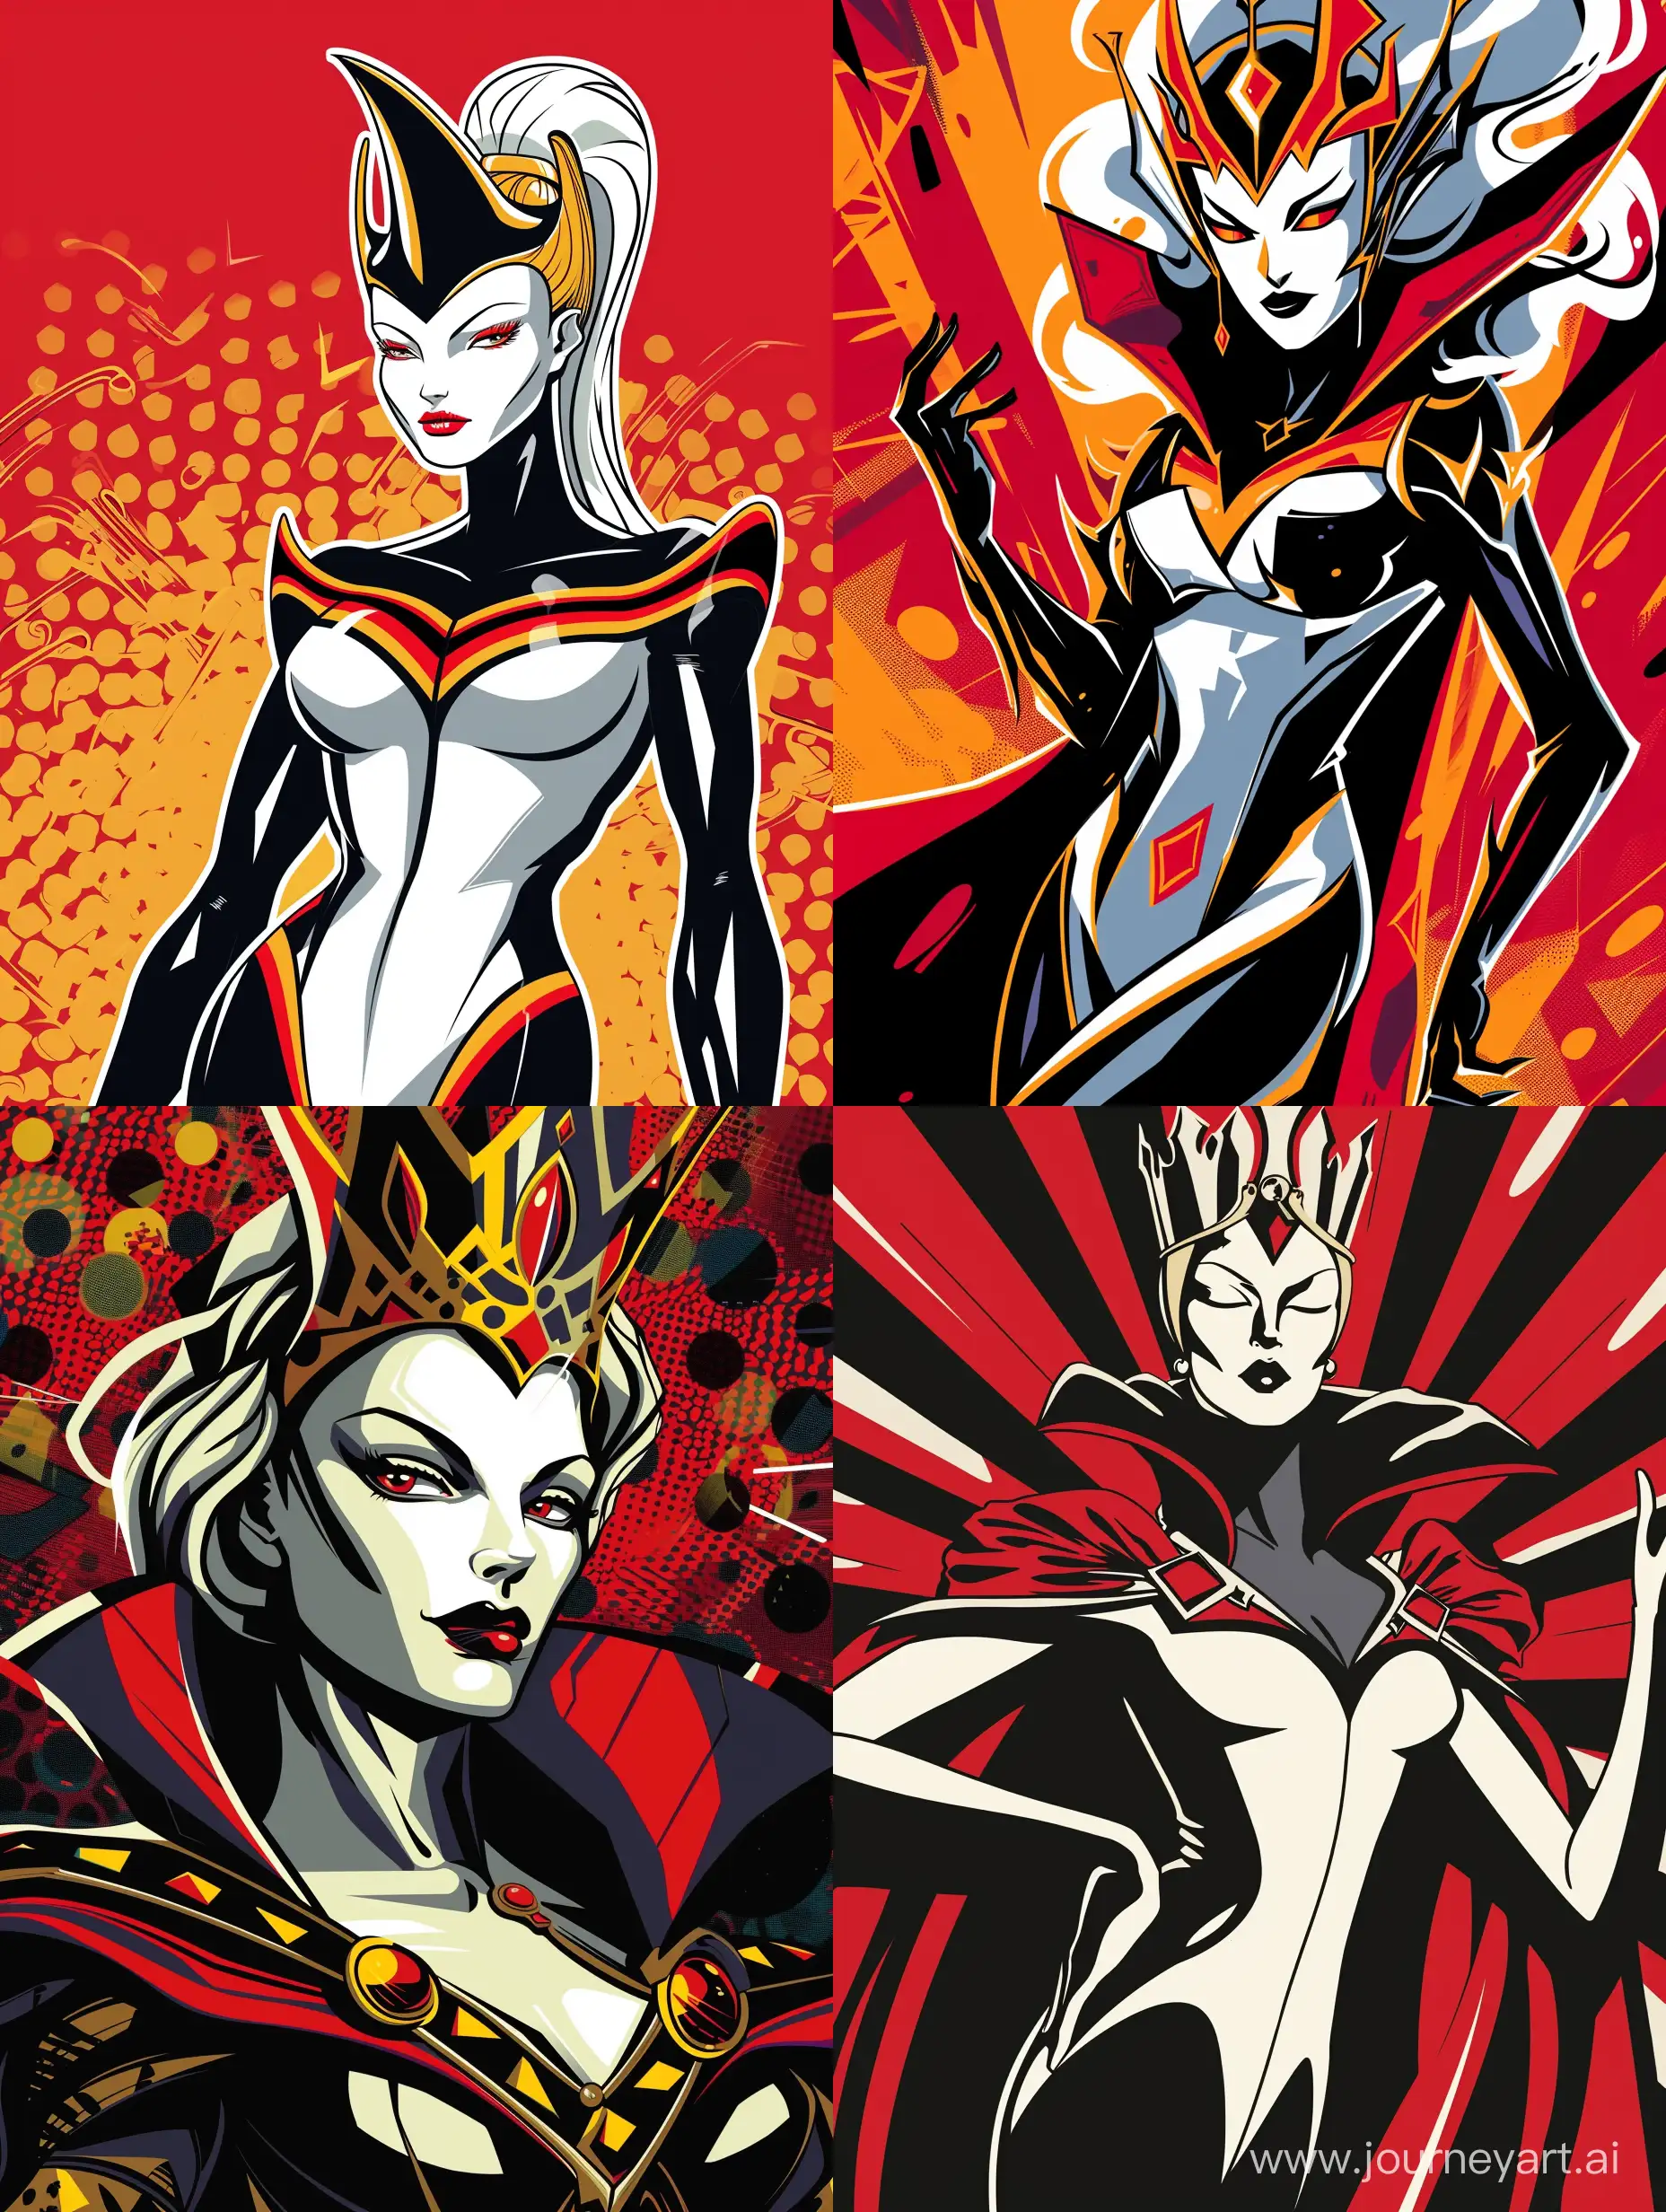 The pop art style image pays homage to the majestic presence of the white female sphmatic black queen, using bold colors, sharp outlines and exciting composition to emphasize strength and nobility, the background is appropriate